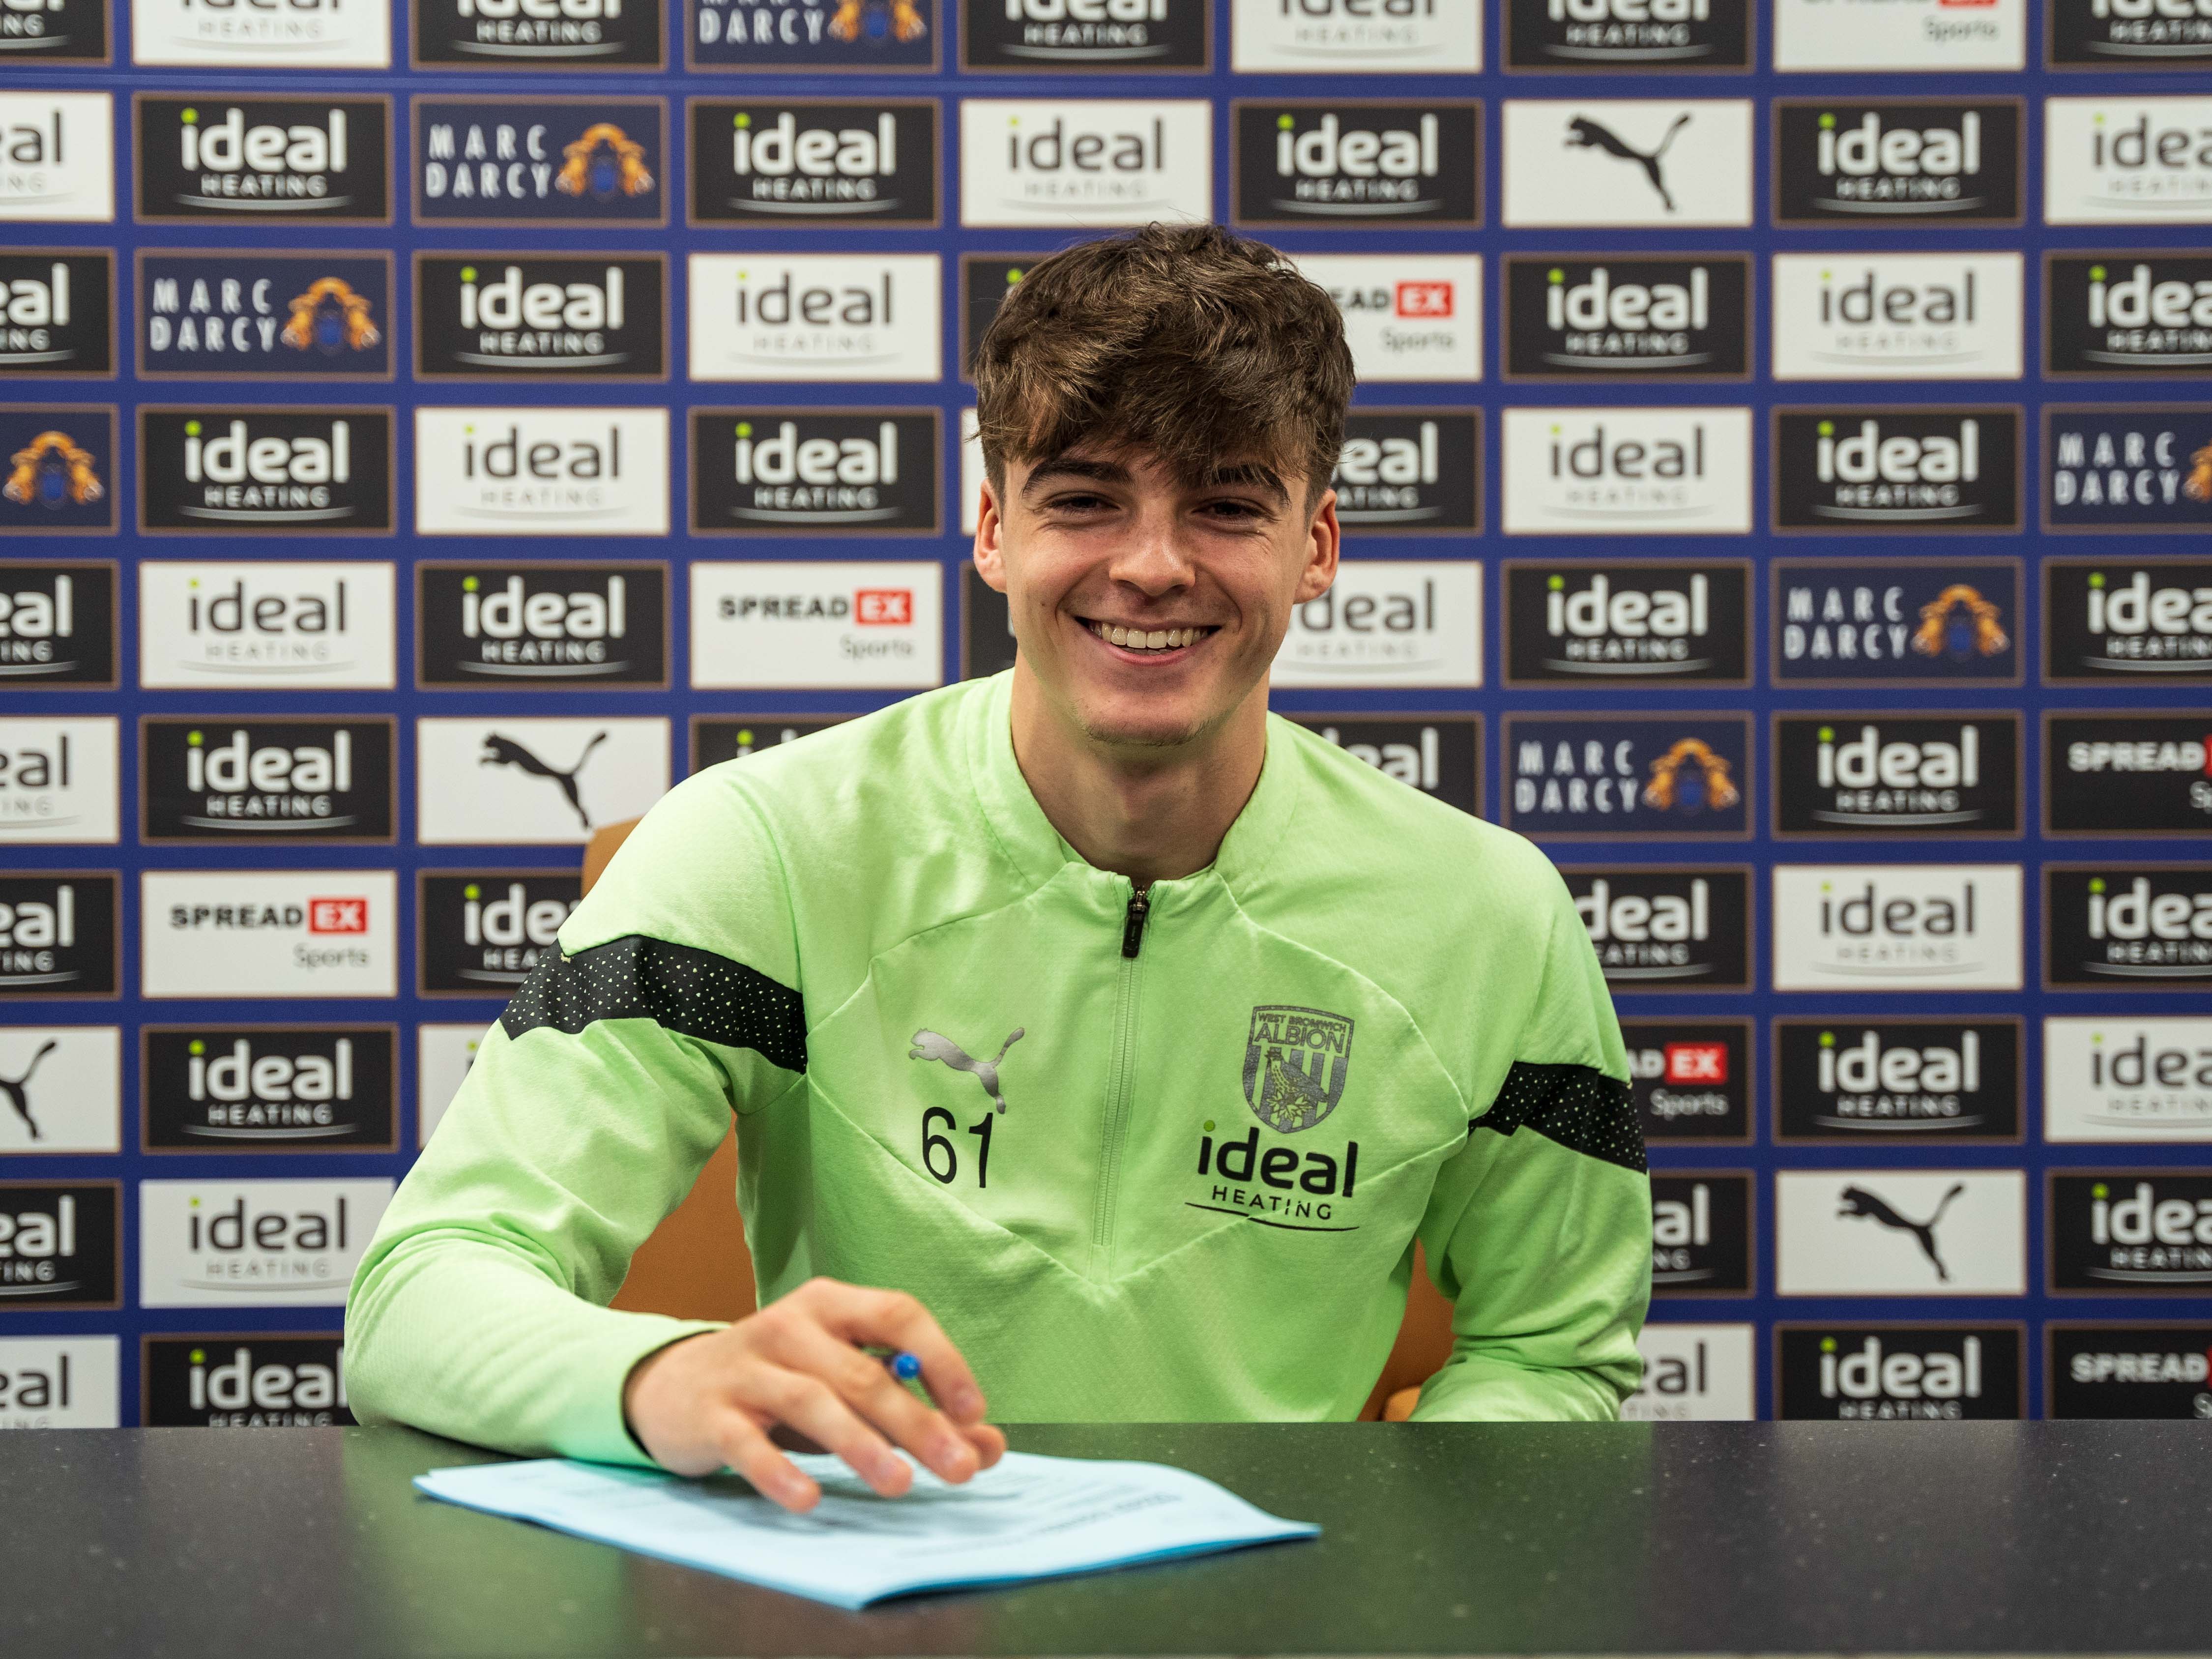 Alex Williams signing his first professional contract with Albion